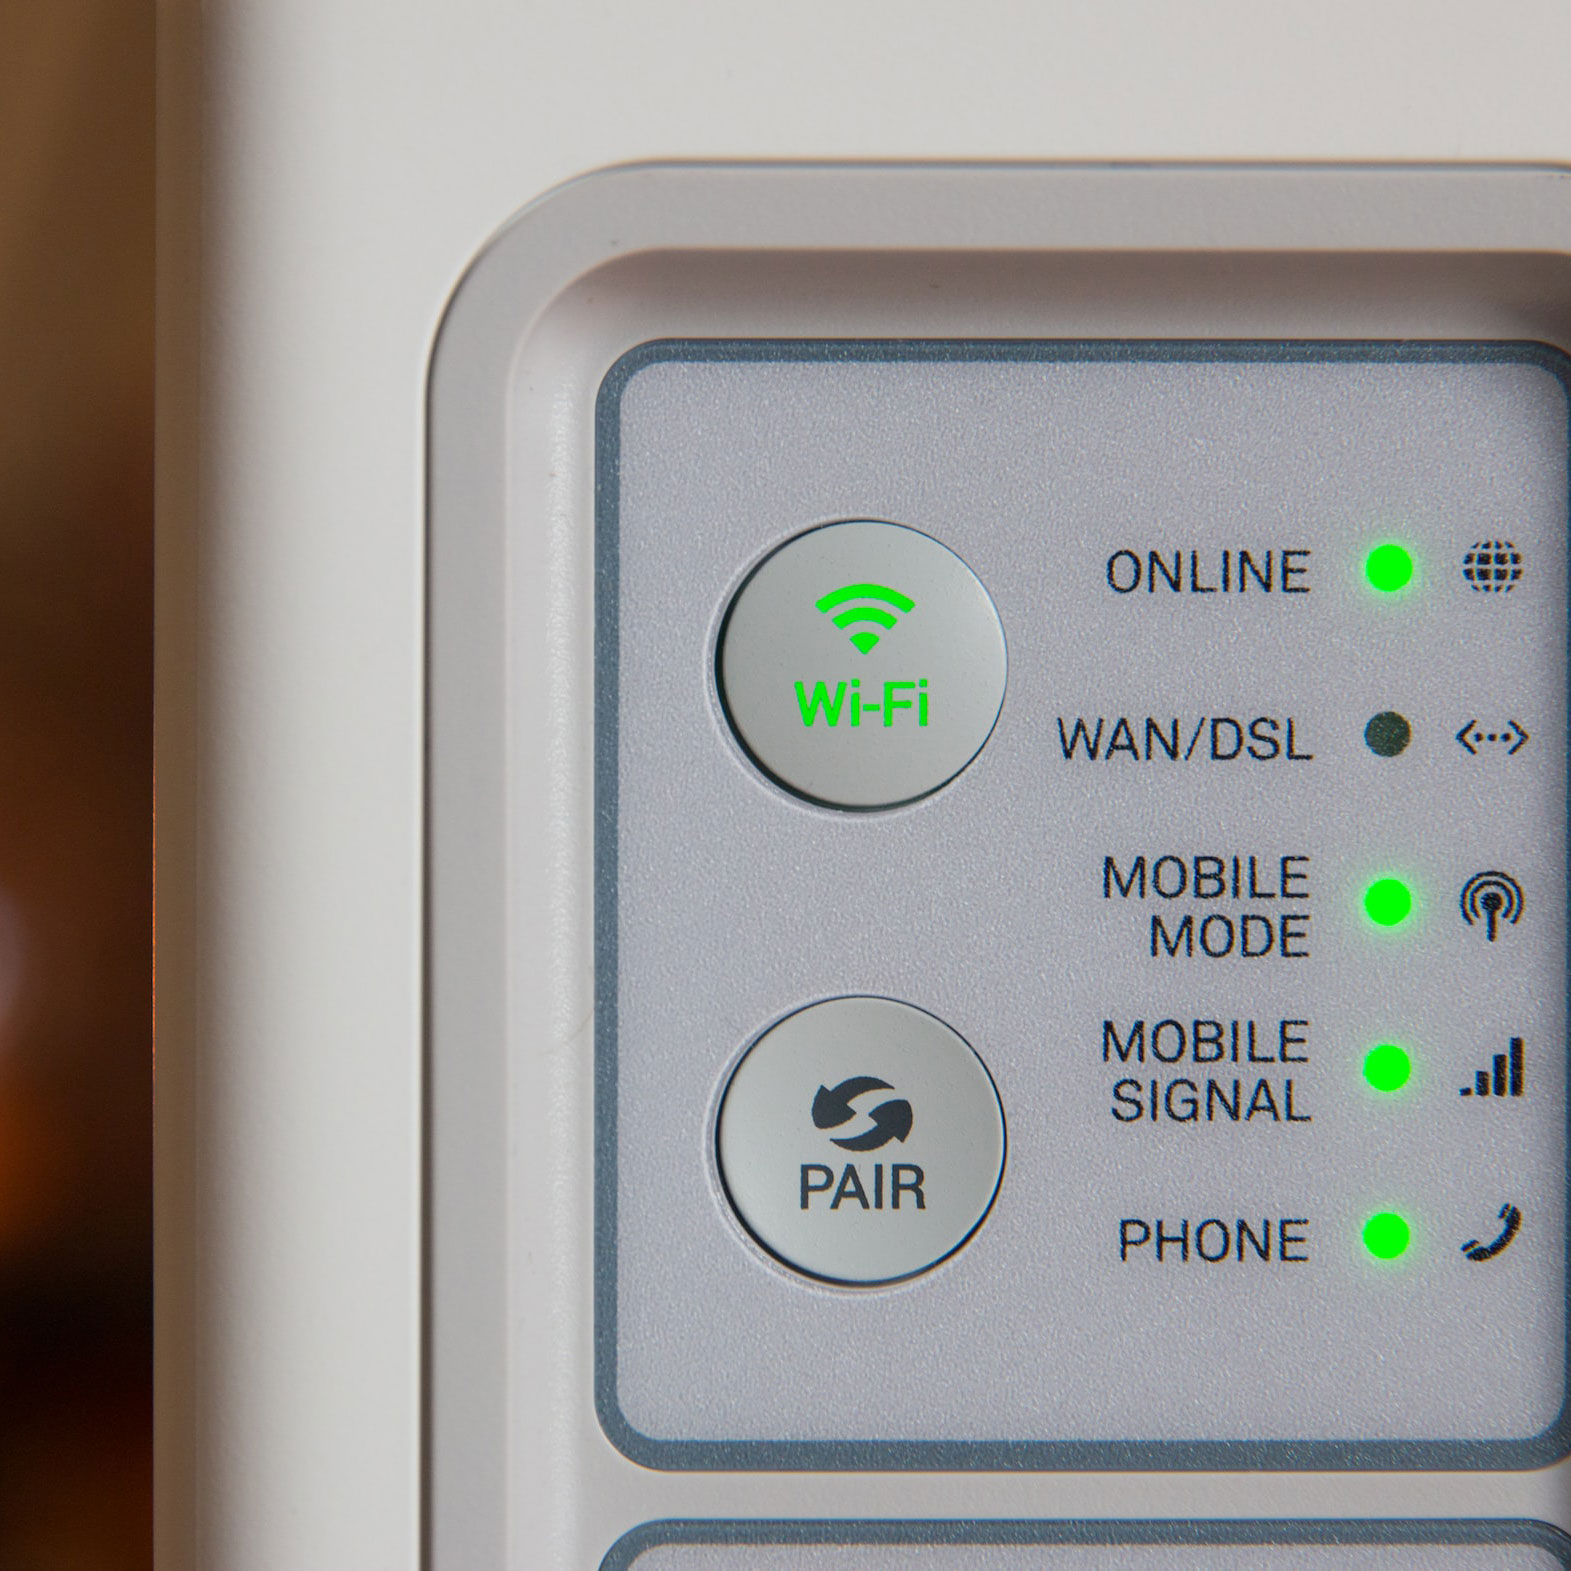 A wi-fi symbol lights up green on a router.